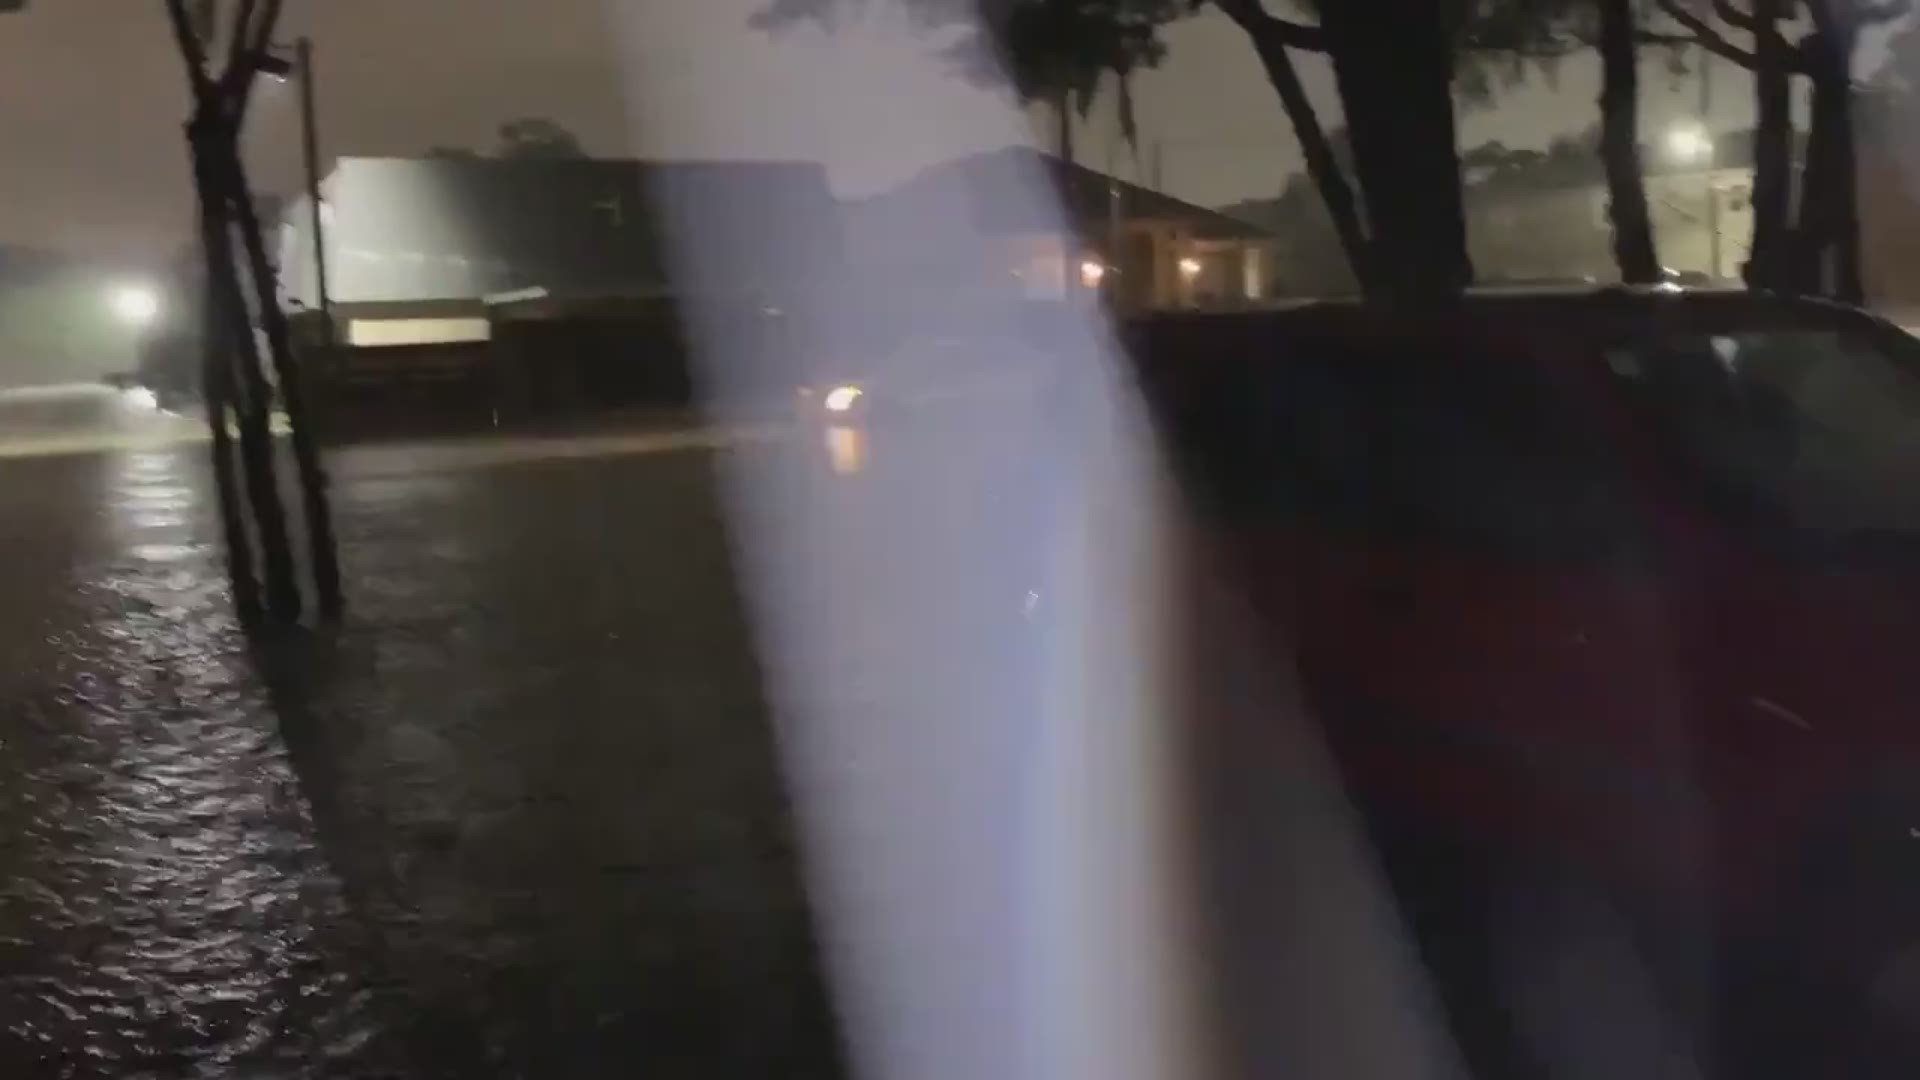 A producer shot this video outside her apartment complex in Beaumont off Crow Road at about 8:40 p.m. on 8/19.